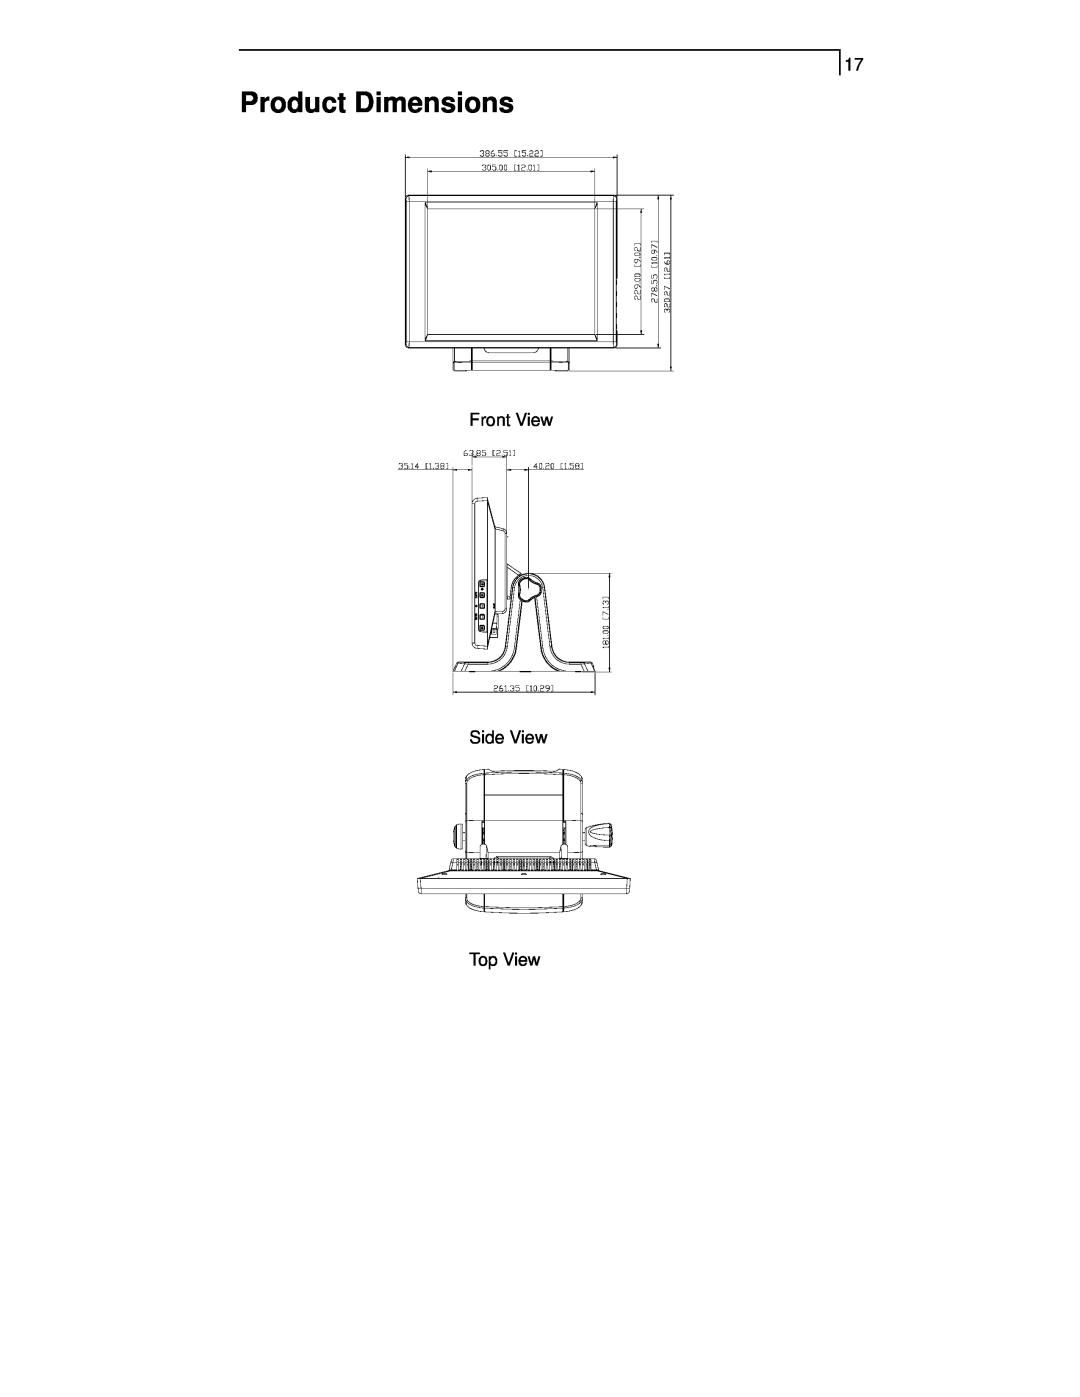 Planar PT1520MU manual Product Dimensions, Front View Side View Top View 